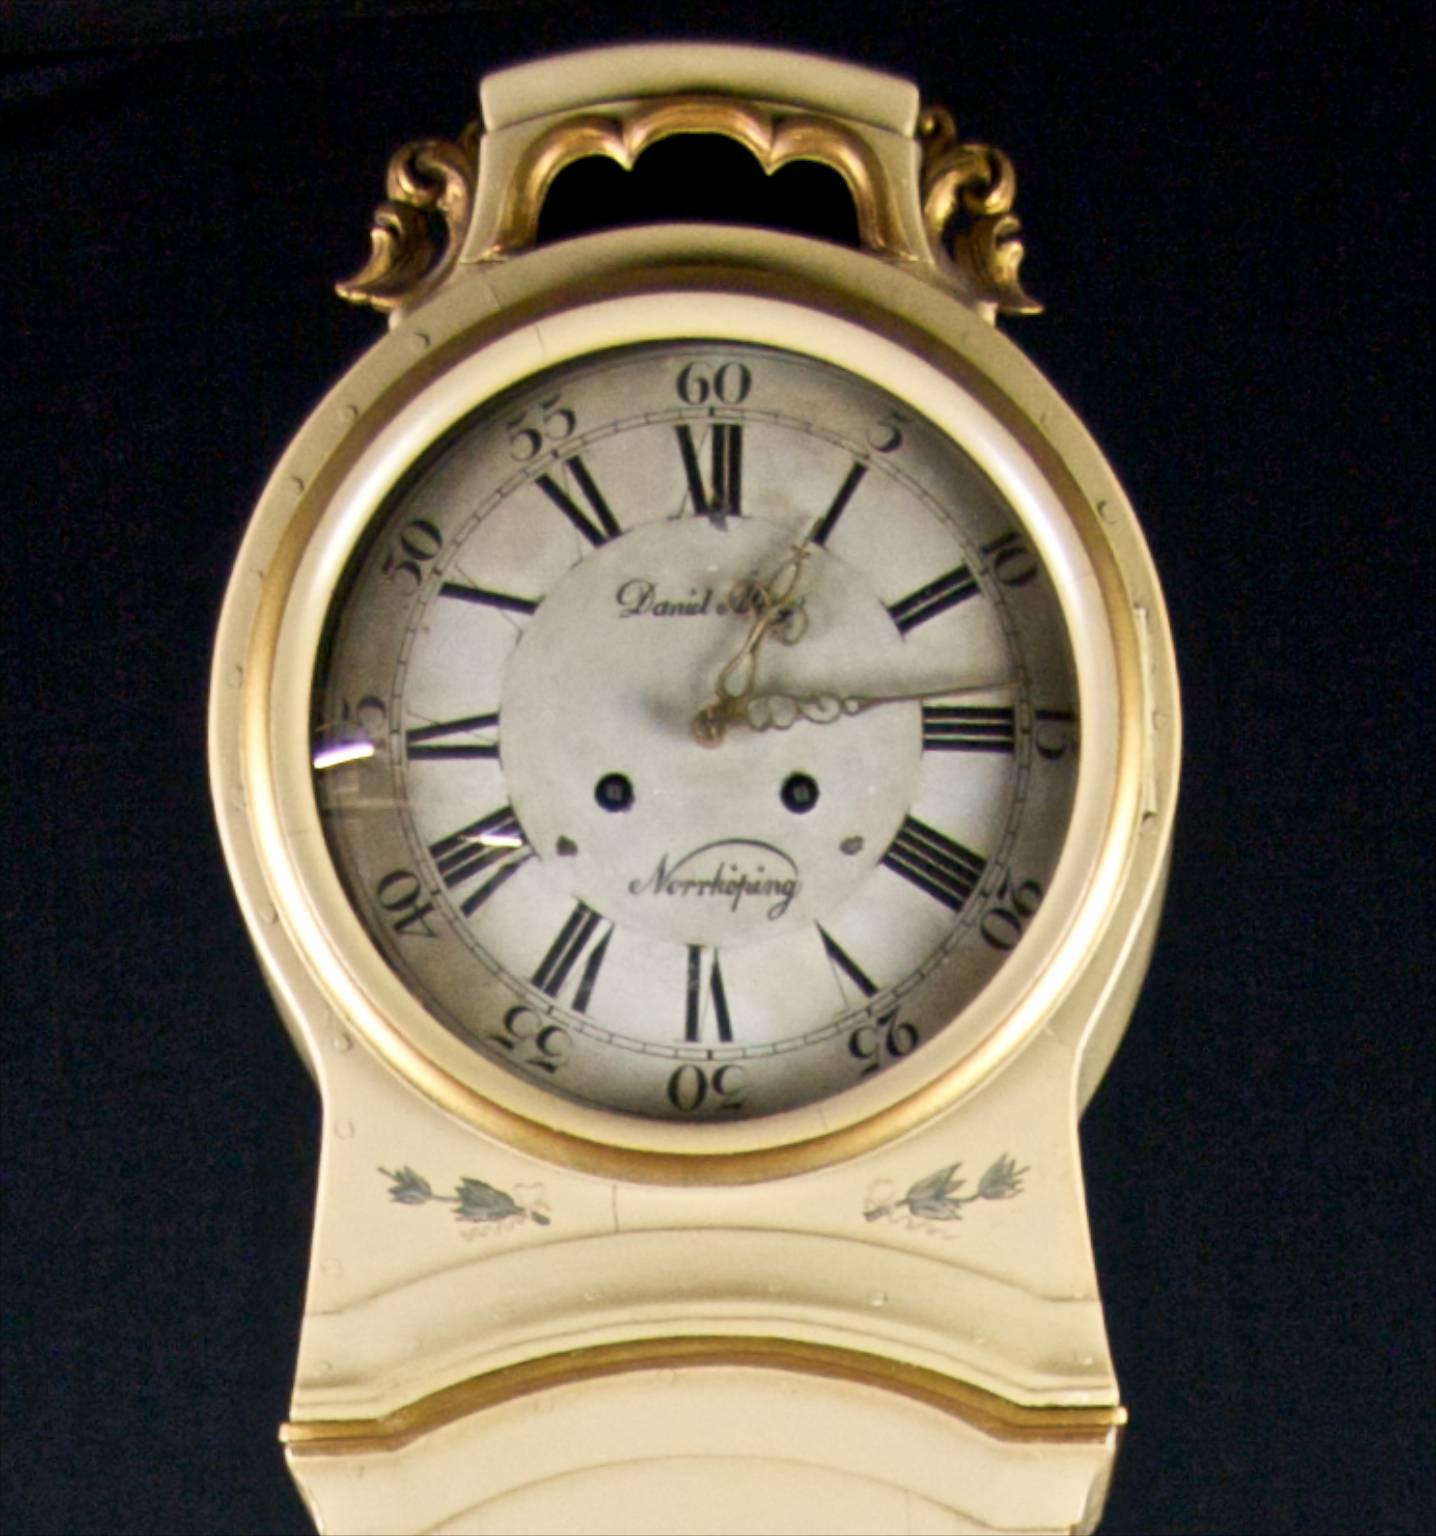 Early 1800s Mora clock with stunning hand painted trompe l'oeil flower wreathes and patterns with sumptuous carved detail on the hood and plinth.

This mora clock is a unique find, great shape and wonderful detail. Incredible to look at. It has a